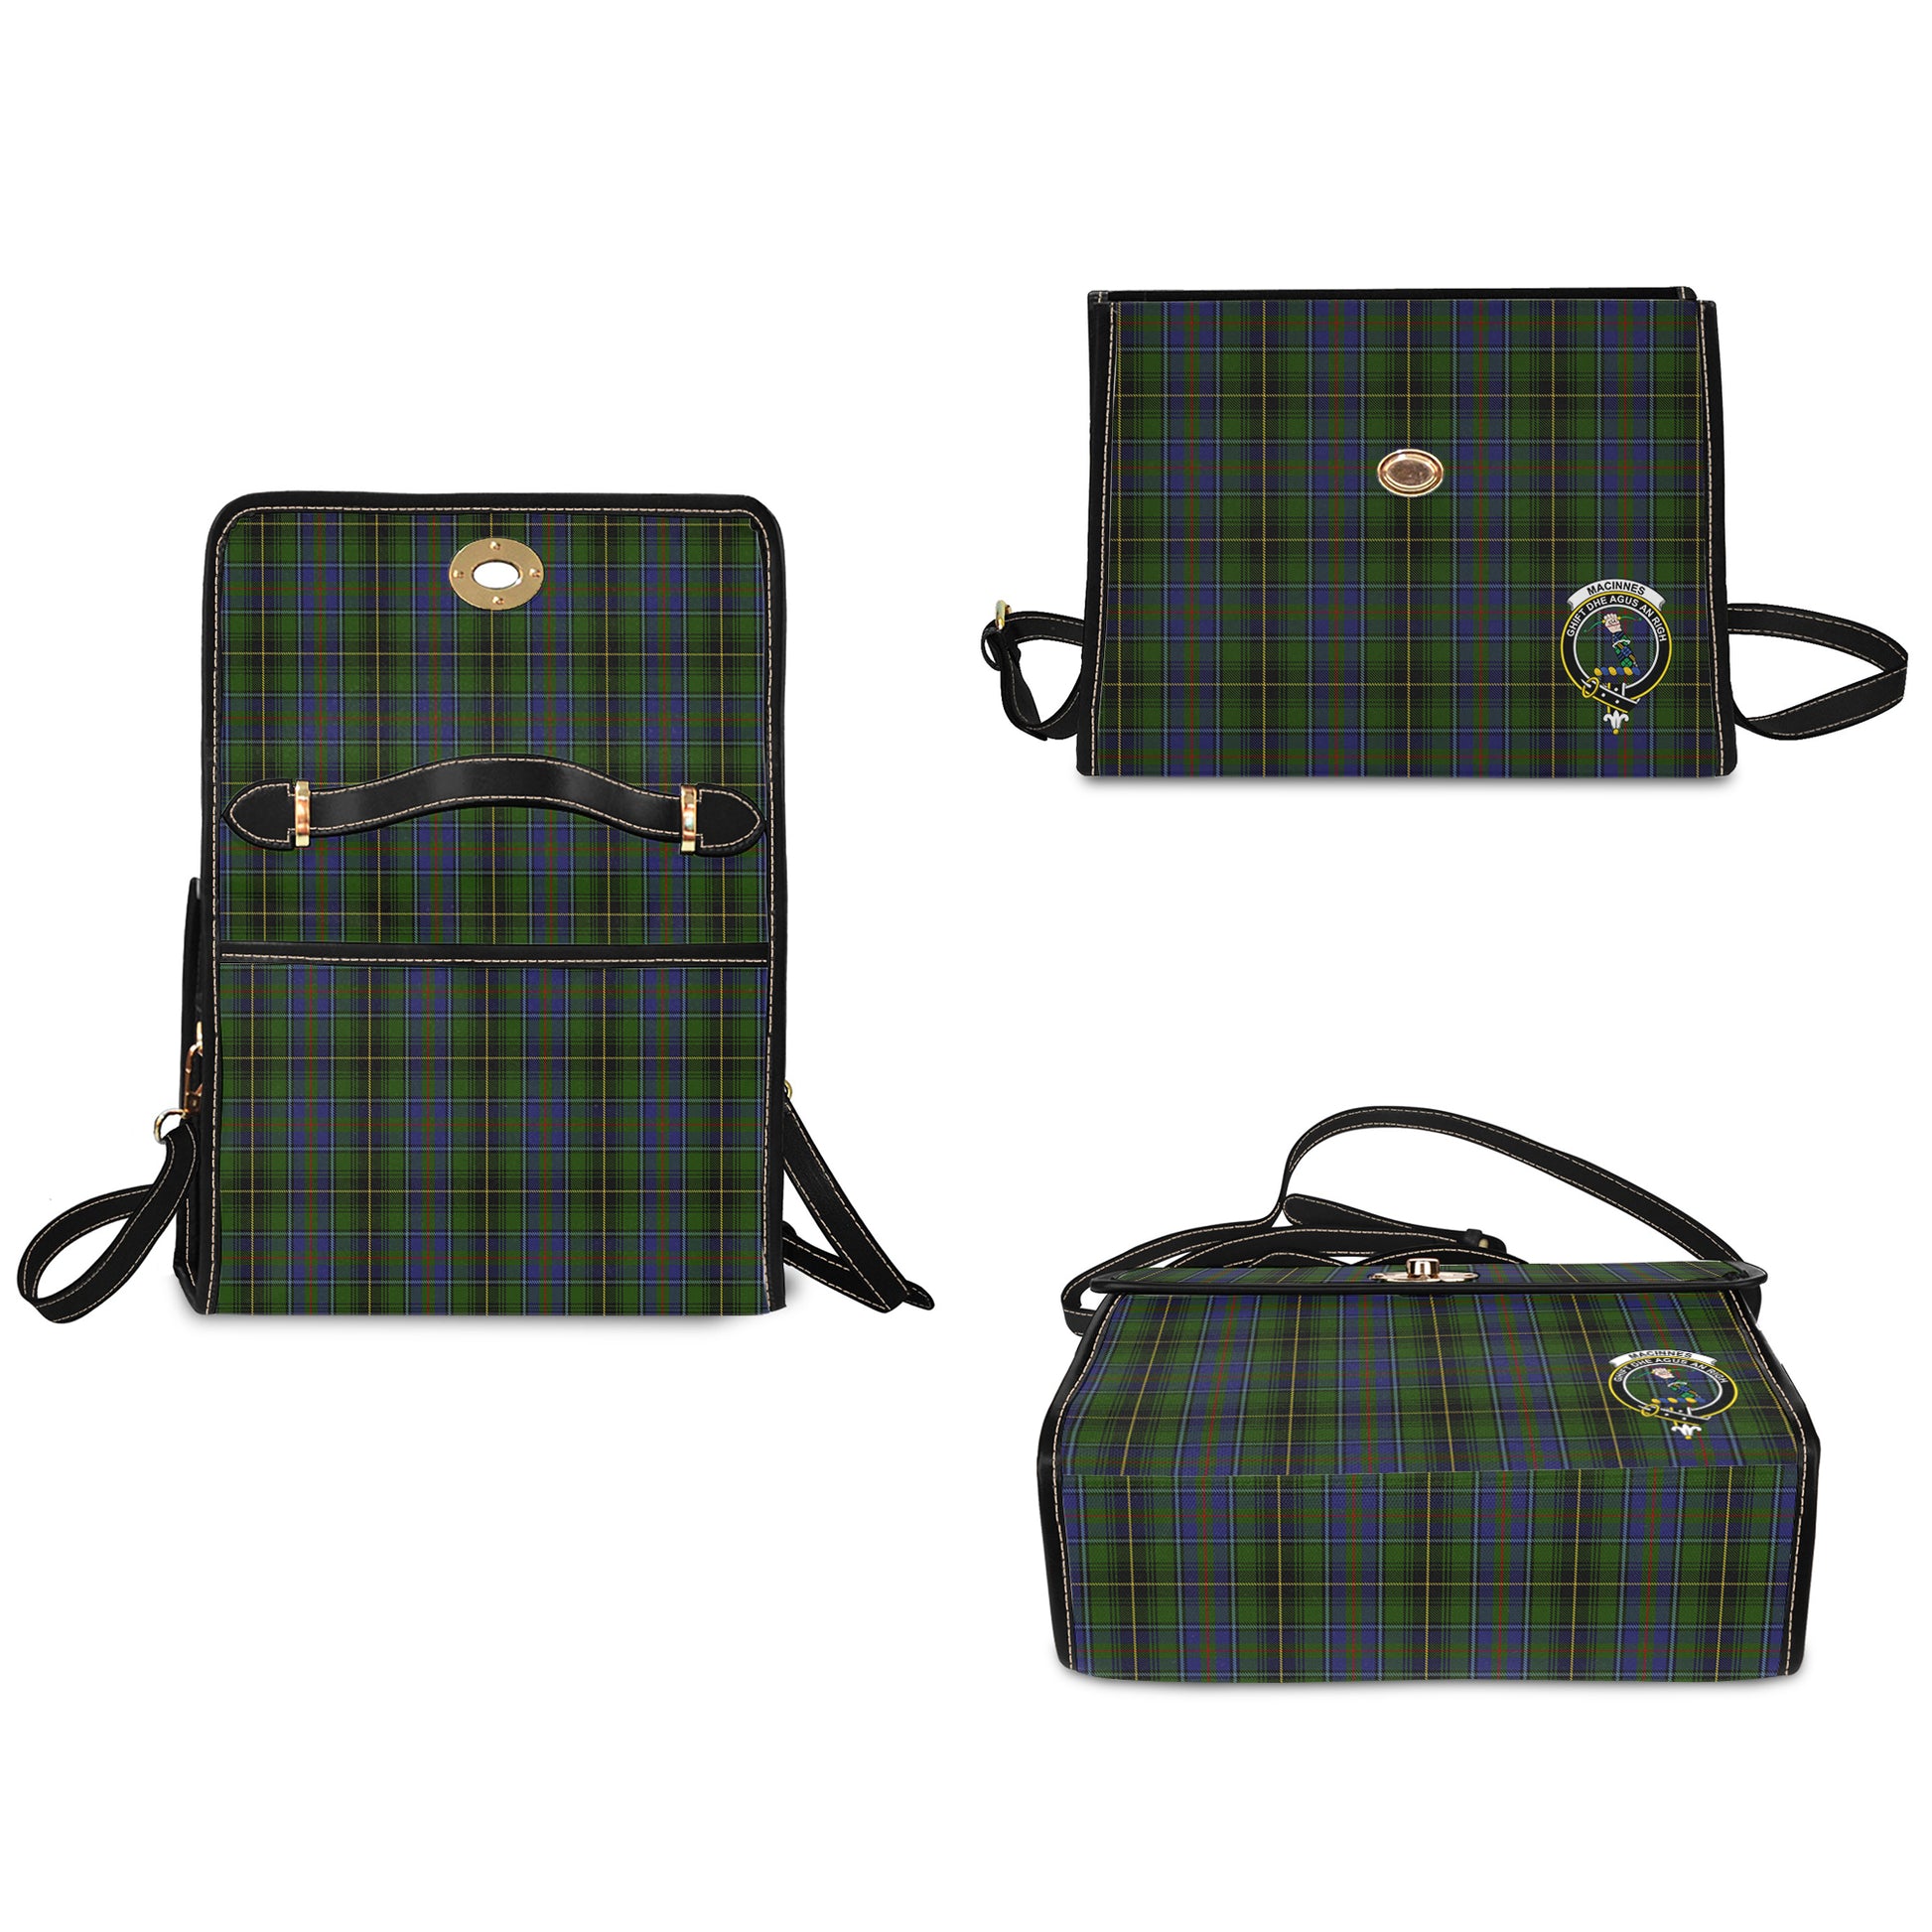 macinnes-tartan-leather-strap-waterproof-canvas-bag-with-family-crest